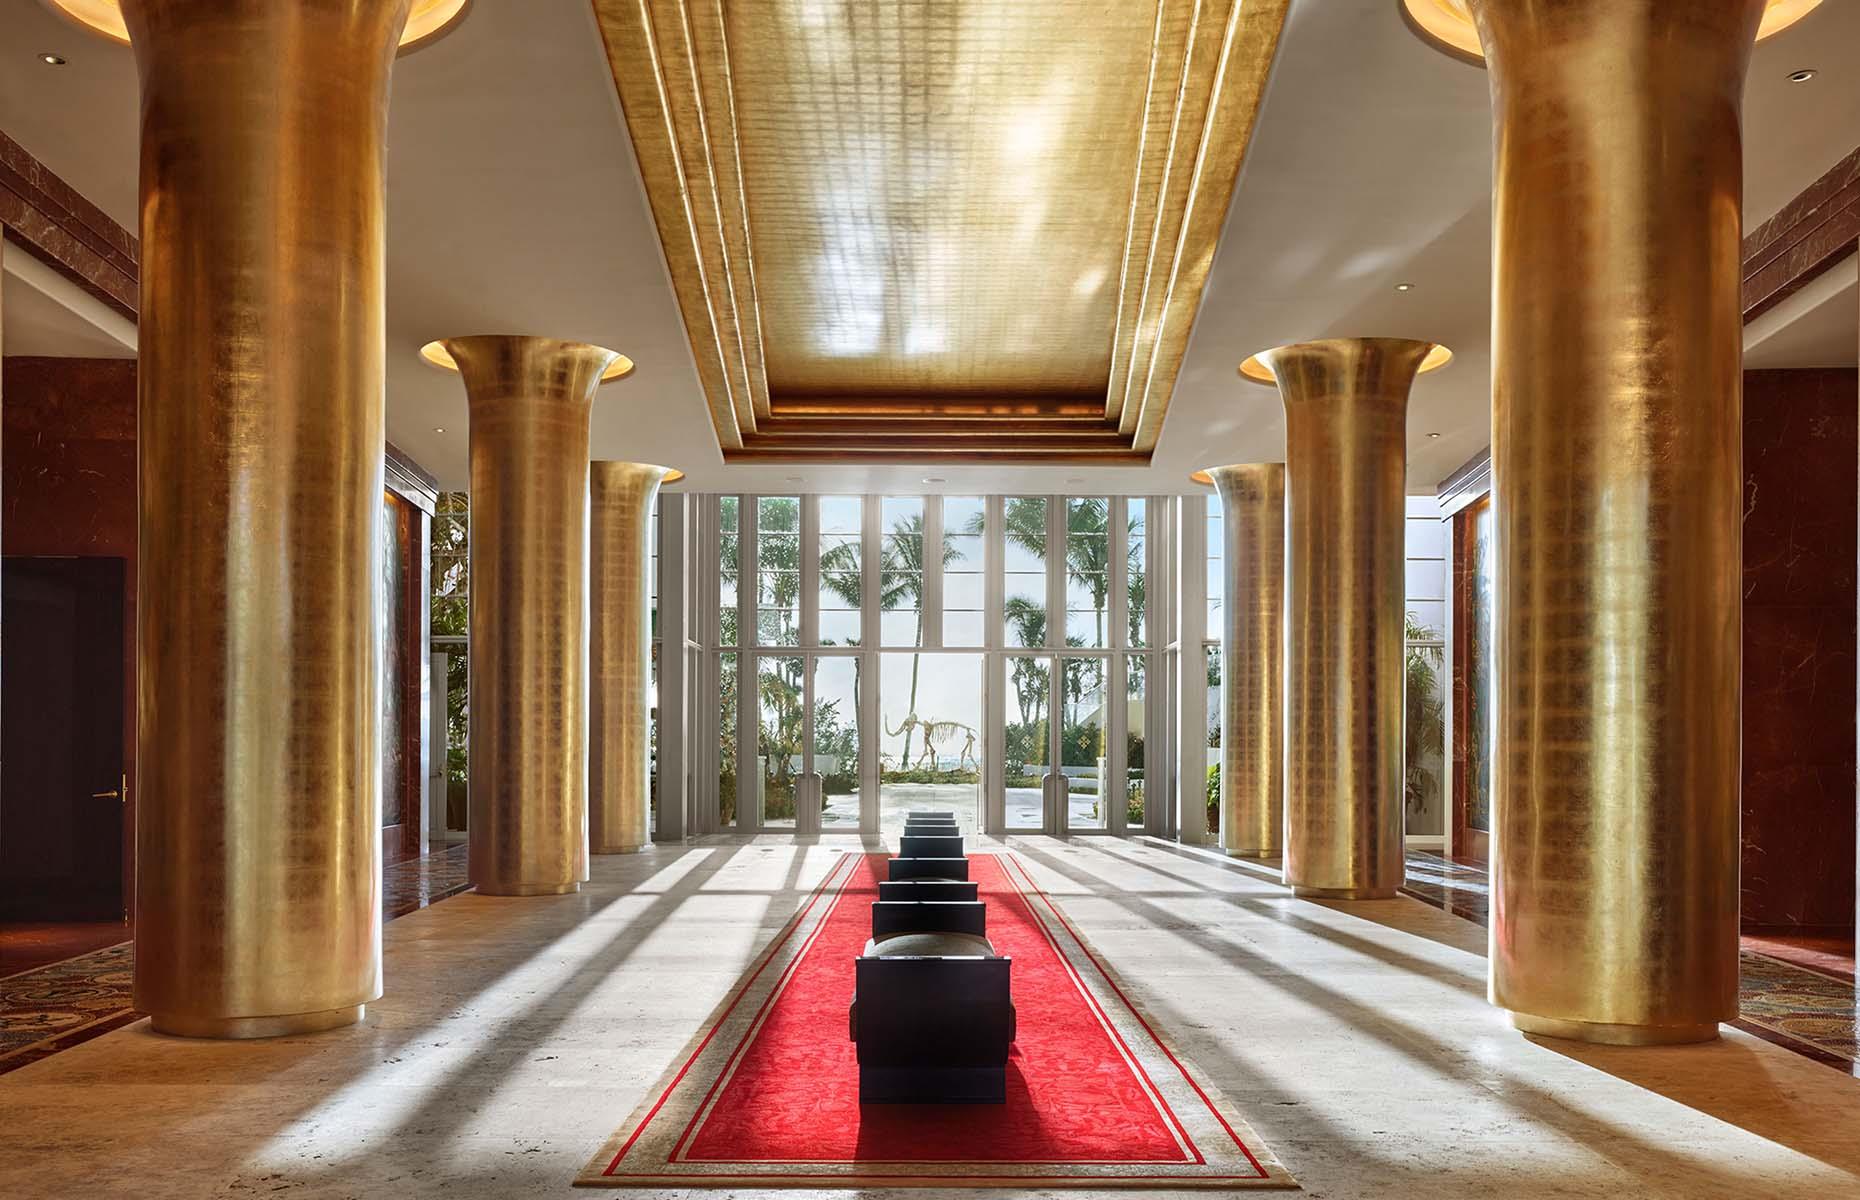 In pictures: The world's most beautiful hotel lobbies